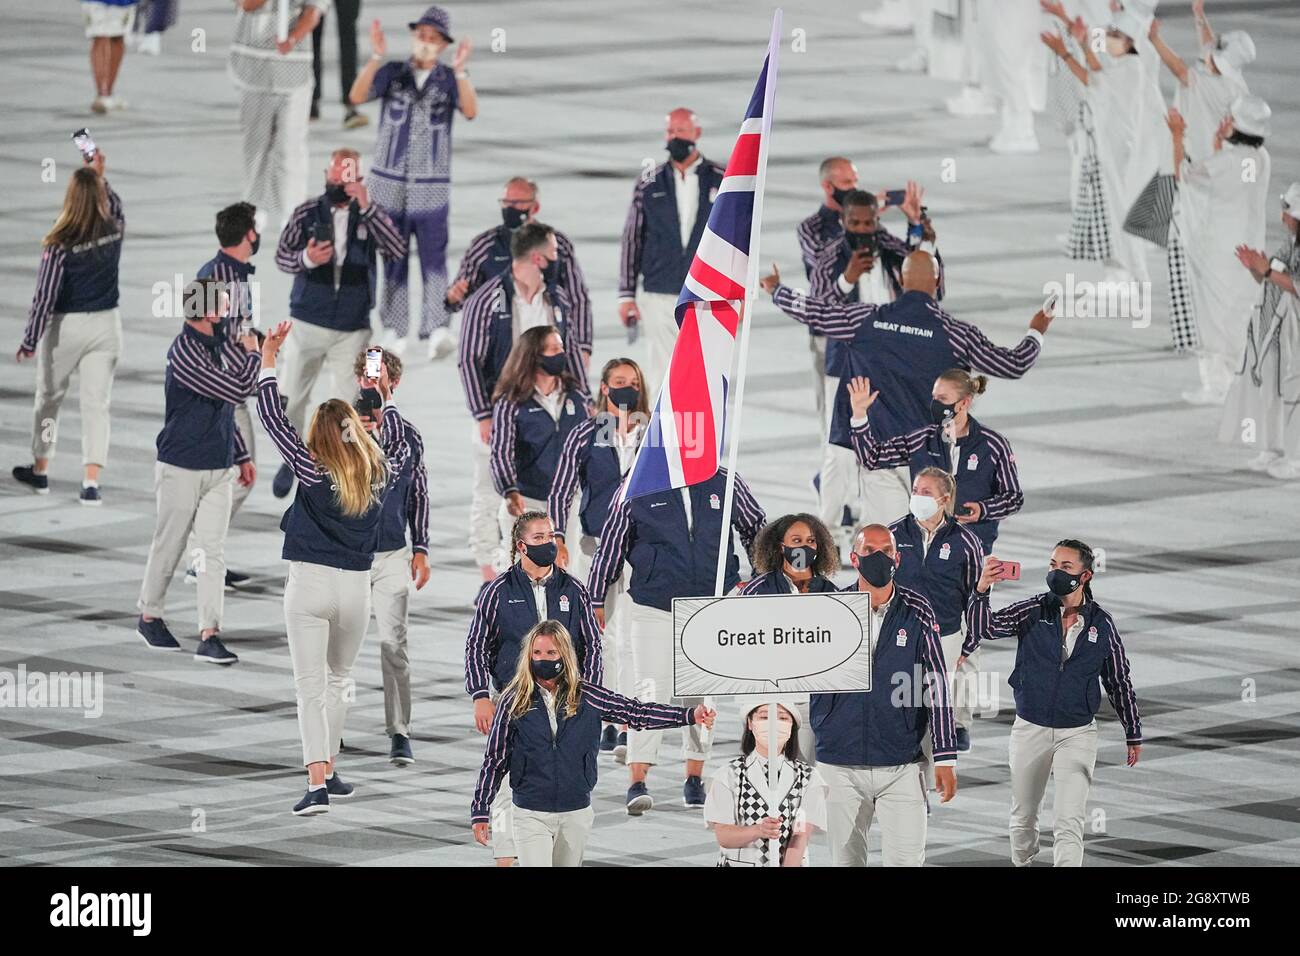 Tokyo, Japan. 23rd July, 2021. Olympics: Opening ceremony at the Olympic Stadium. The Great Britain team with flag bearers sailor Hannah Mills and rower Mohamed Sbihi enter the stadium. Credit: Michael Kappeler/dpa/Alamy Live News Stock Photo